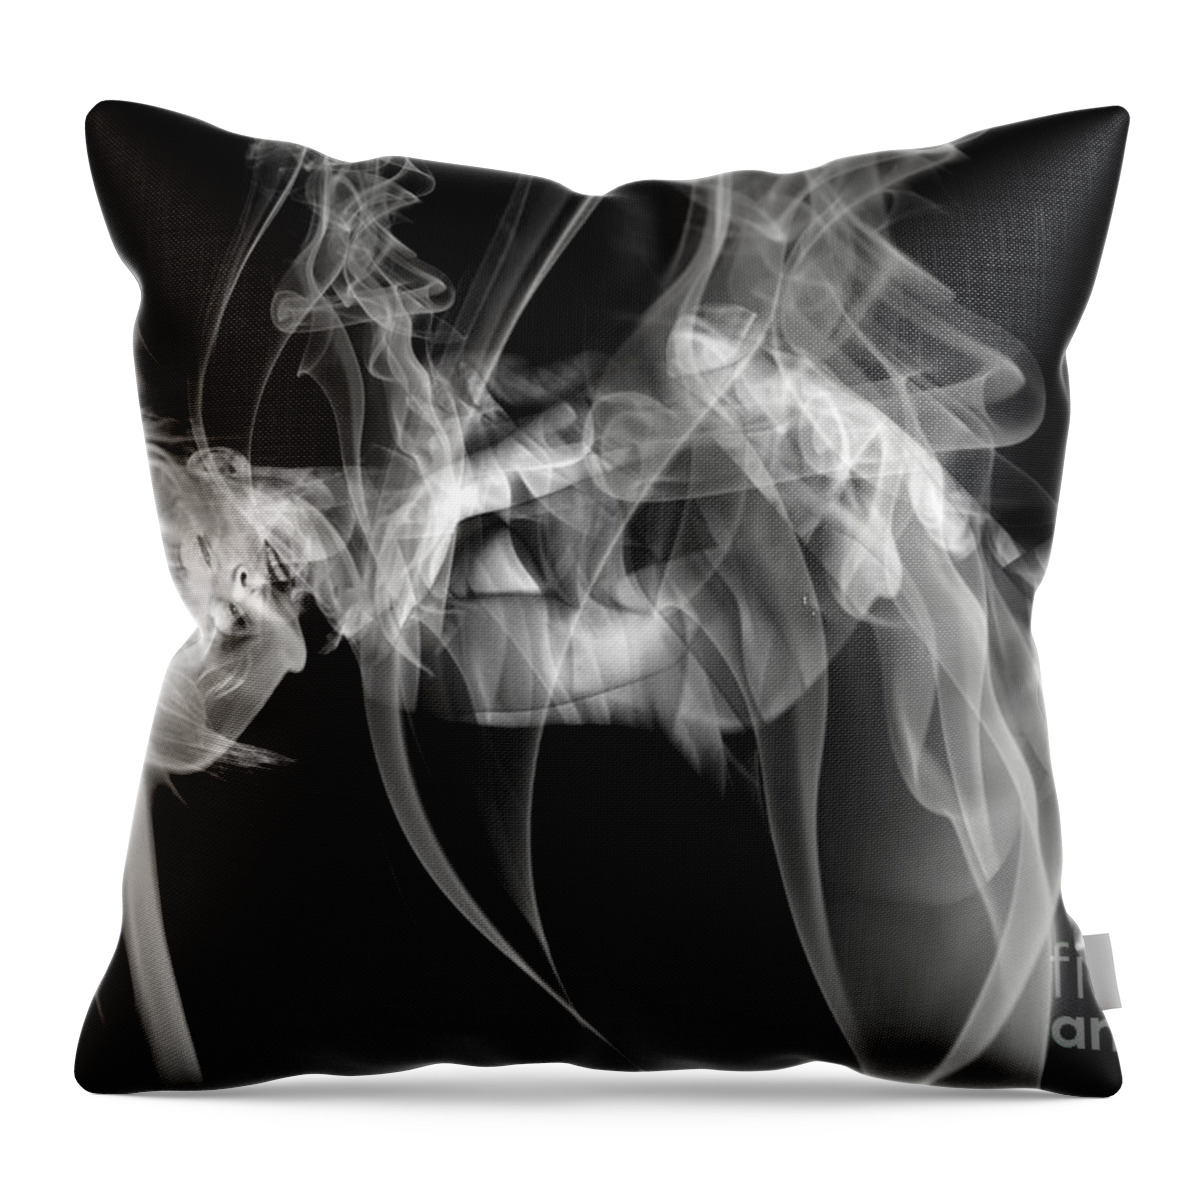 Clay Clayton Bruster Smoke Nude Art Erotic Abstract Beauty Wall Sexy Sensual Throw Pillow featuring the photograph Fantasies In Smoke IV by Clayton Bruster